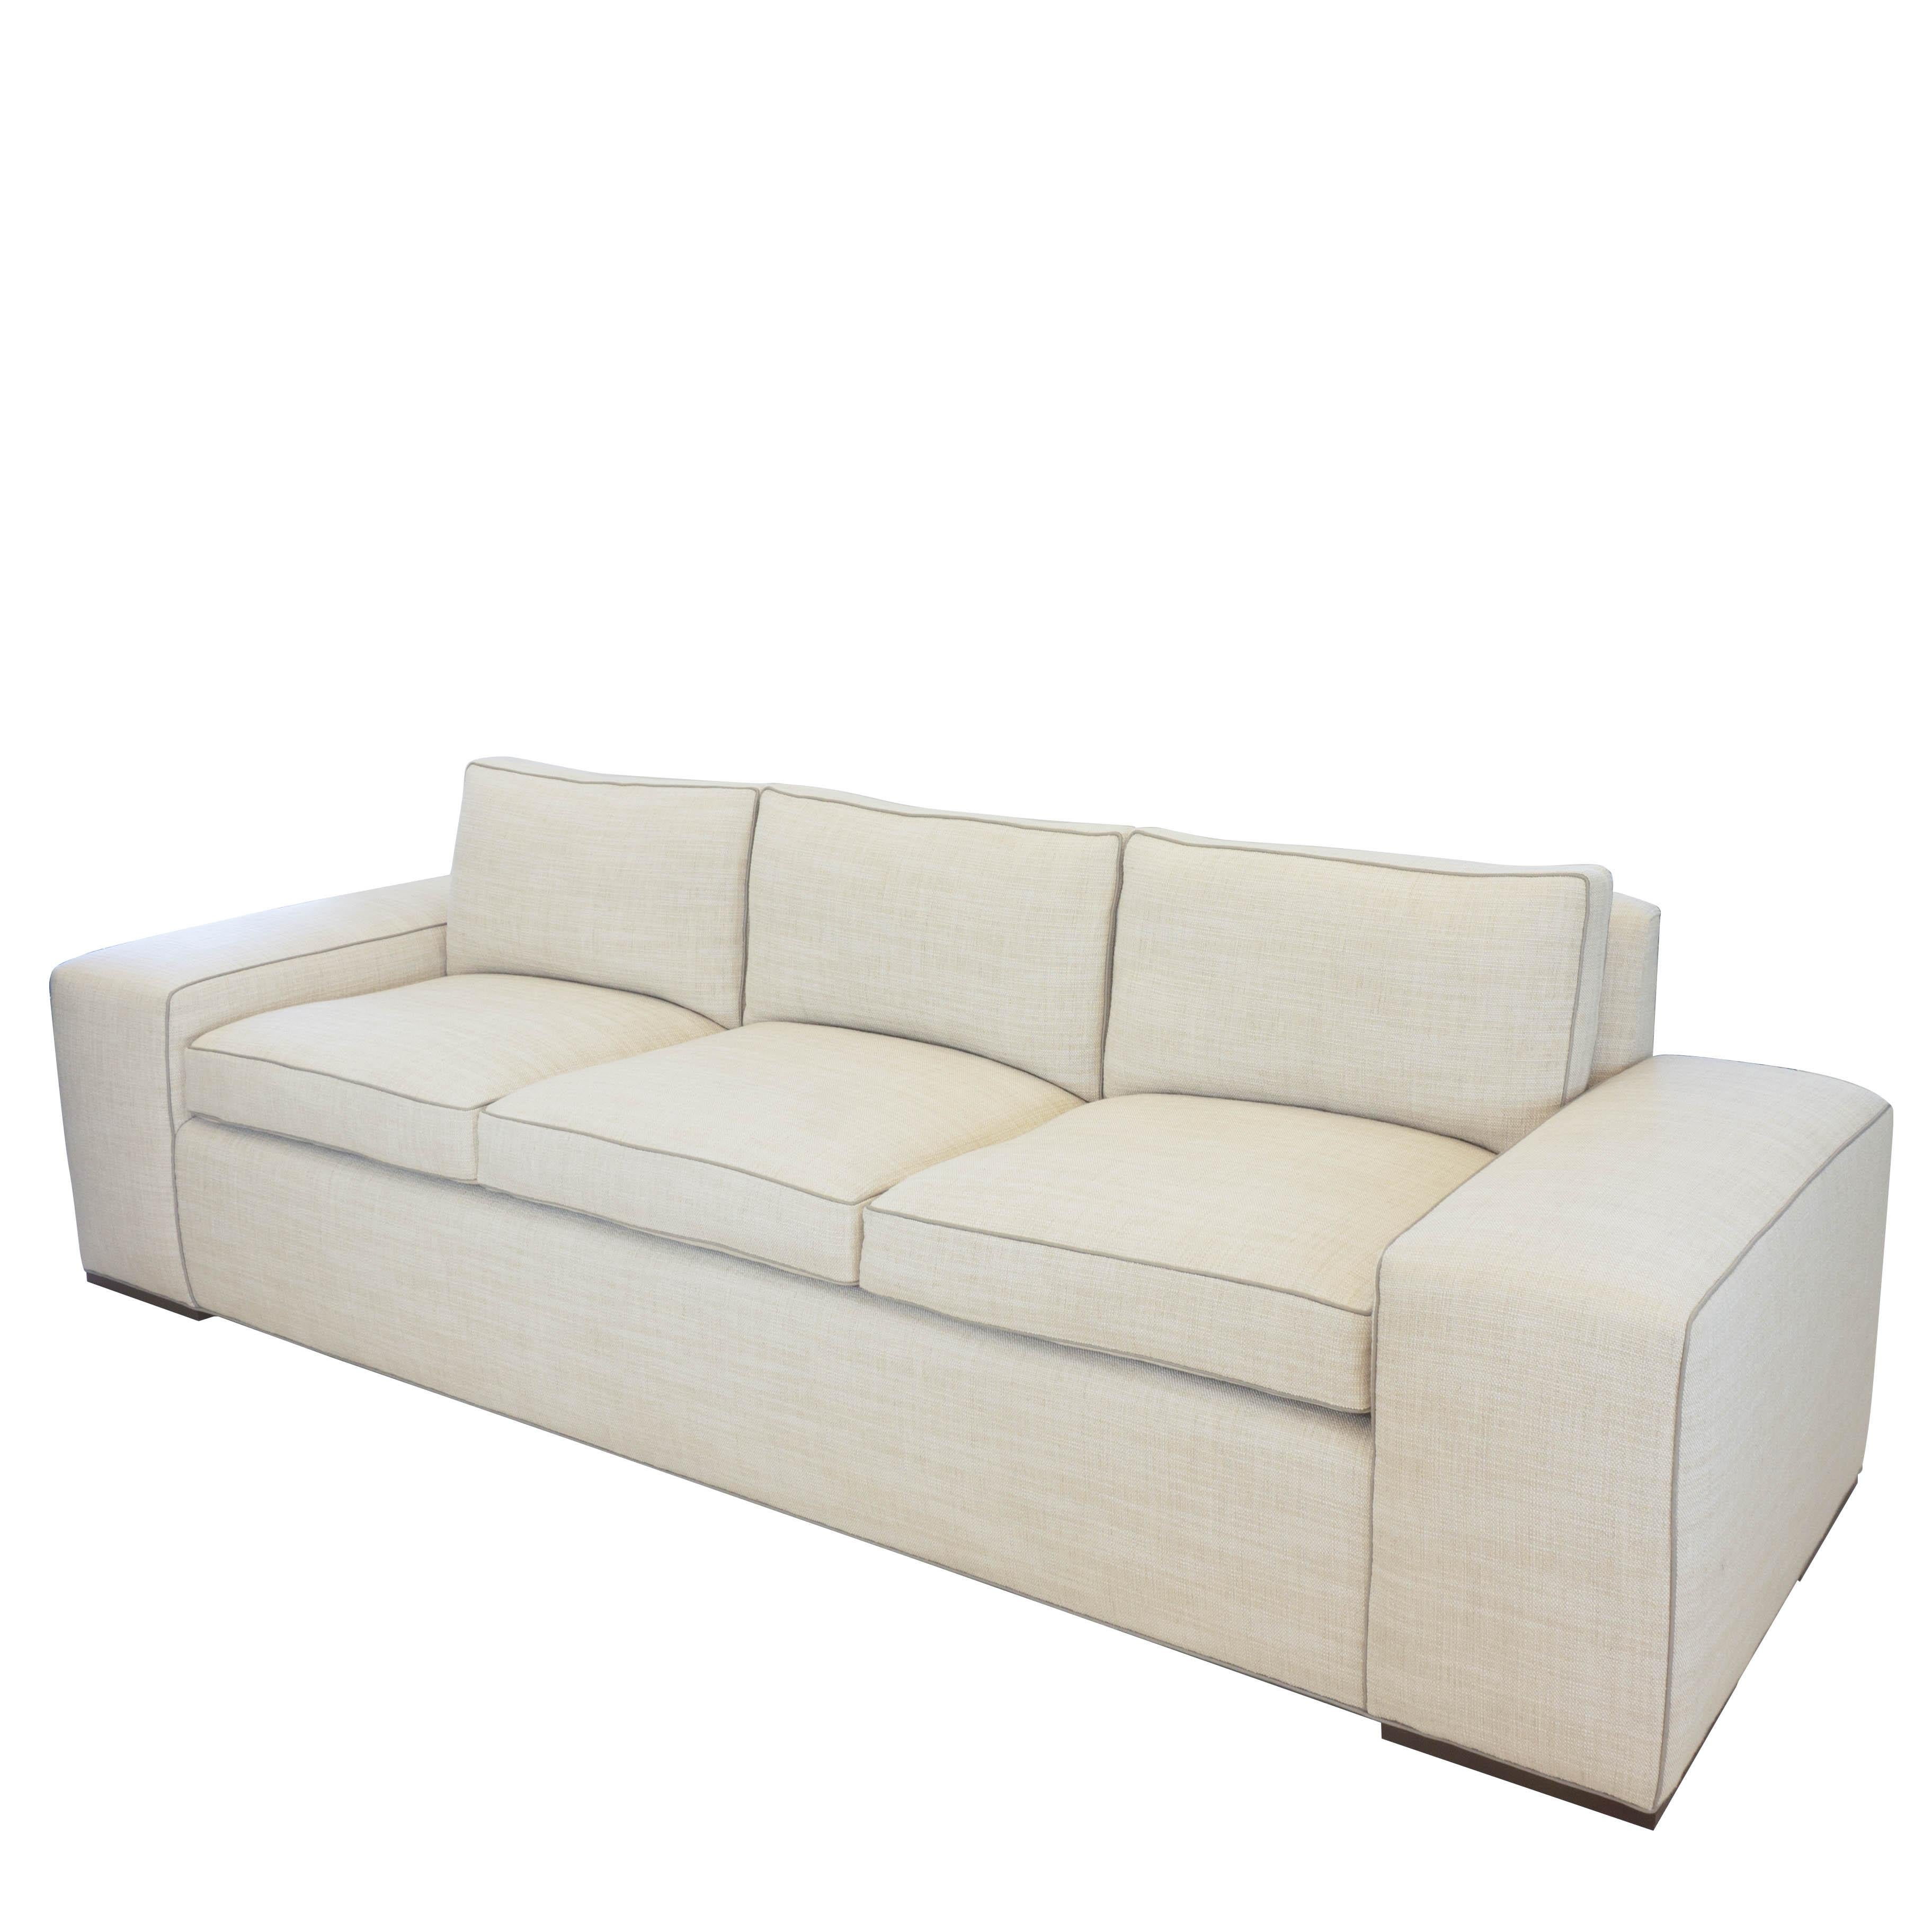 sofa with square arms